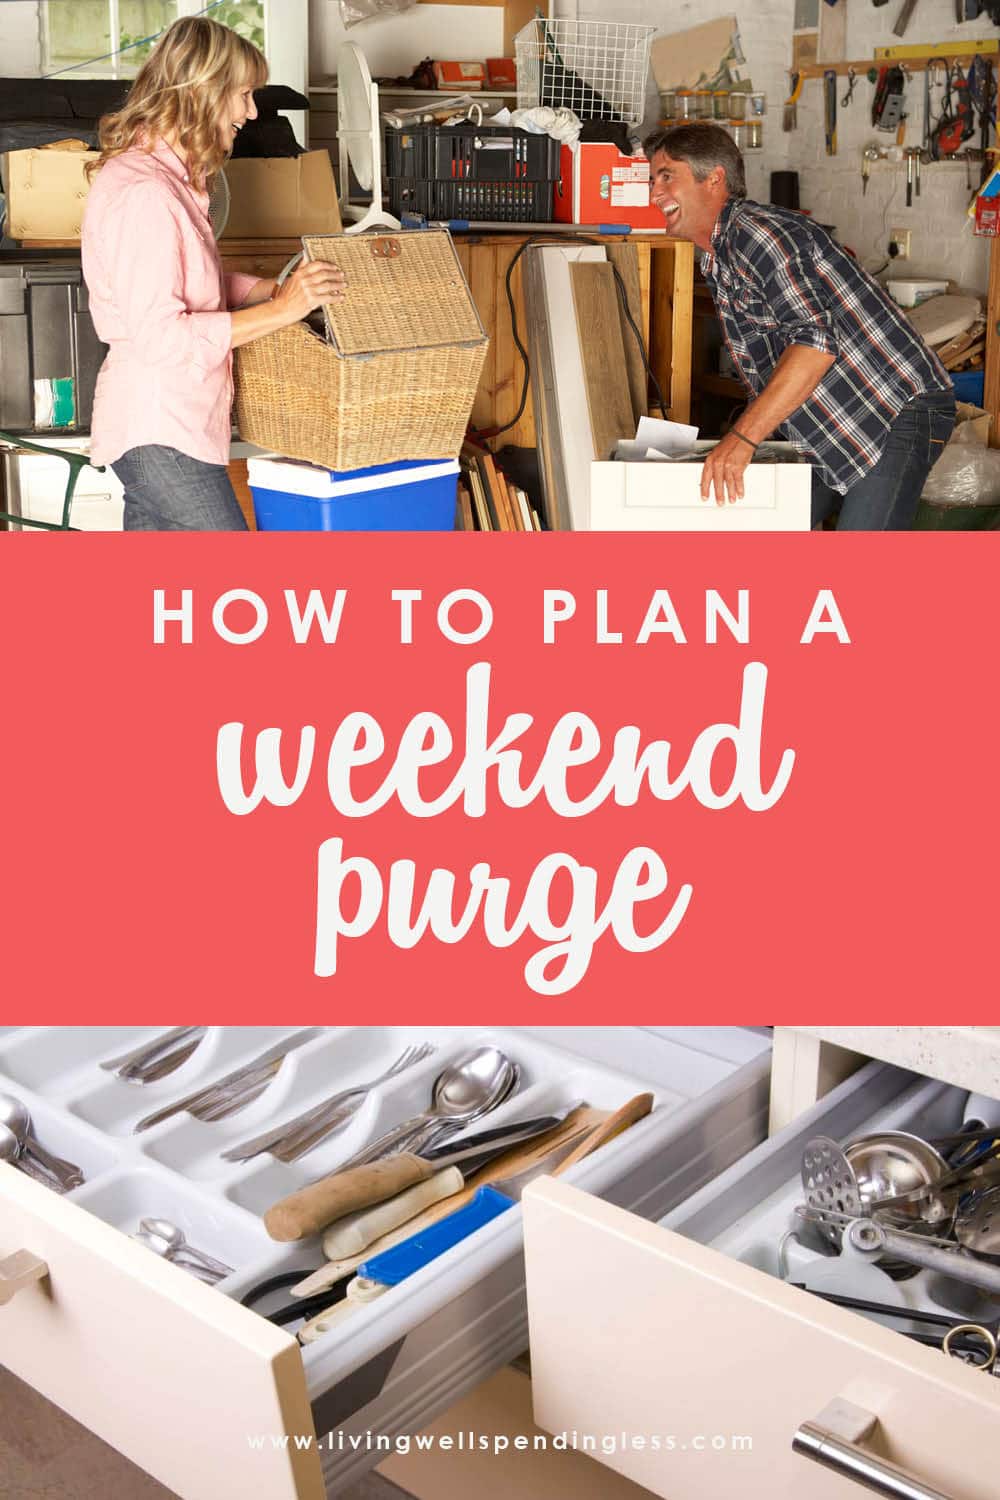 Want to kick-off your Spring Cleaning with a bang? Why not dedicate a weekend to clearing the clutter and getting unstuffed for good? Here's how to plan a weekend purge from start to finish! #weekendpurge #clean #springcleaning #declutter